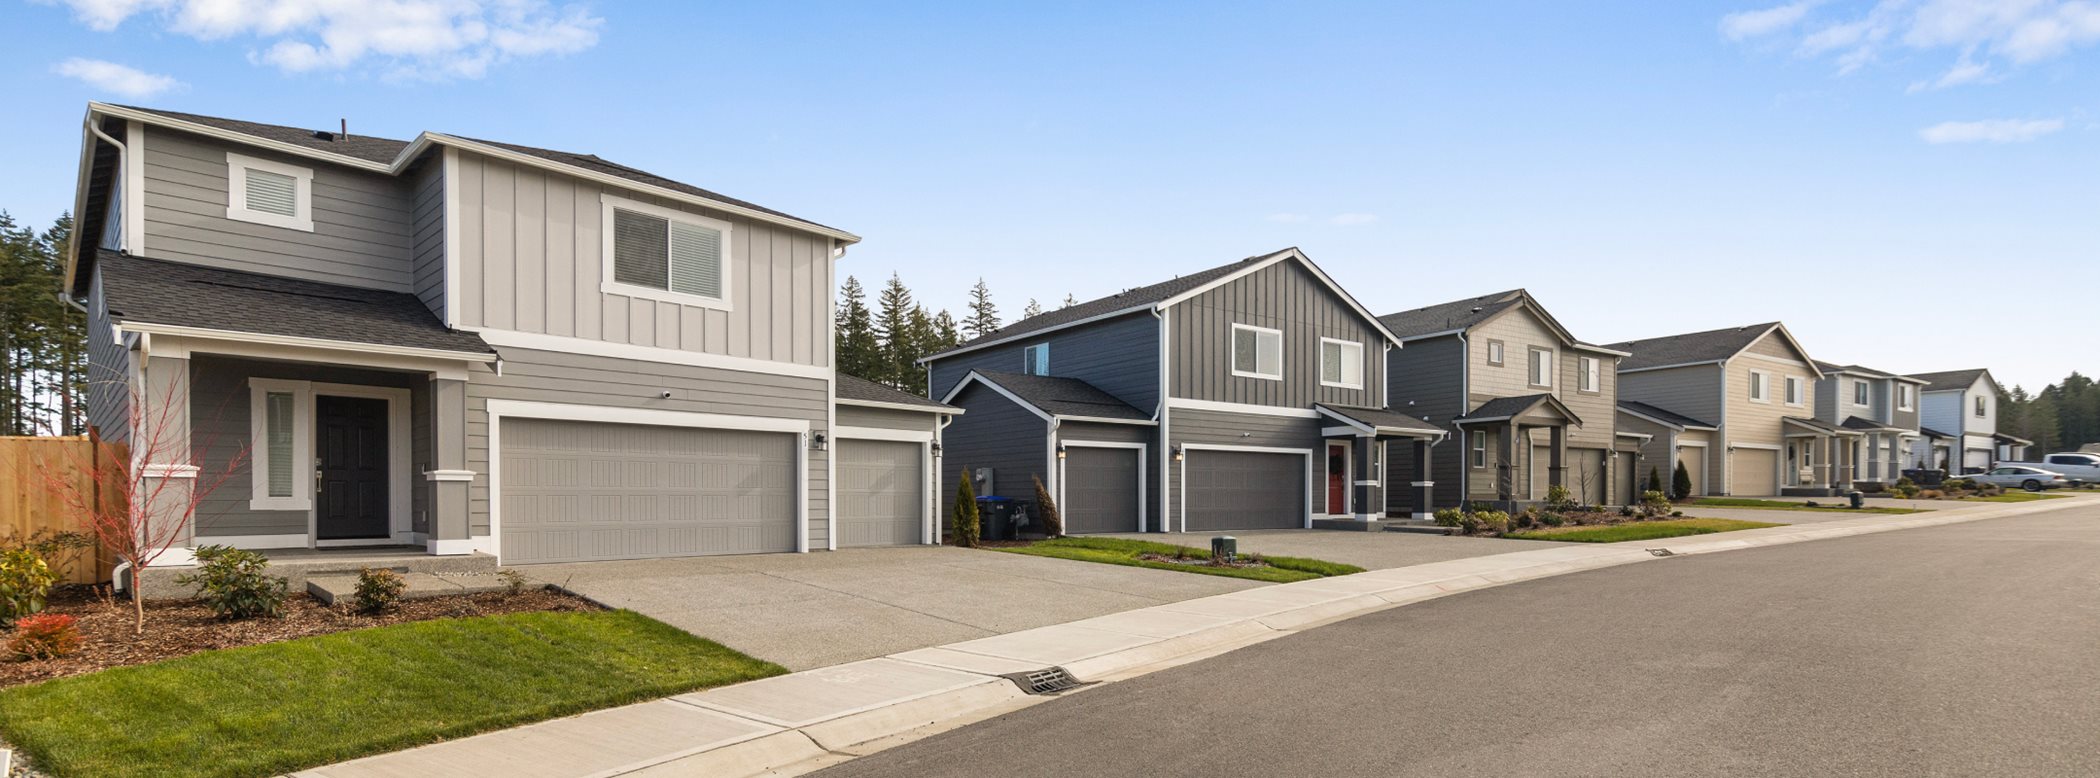 Homes in the olympic ridge community